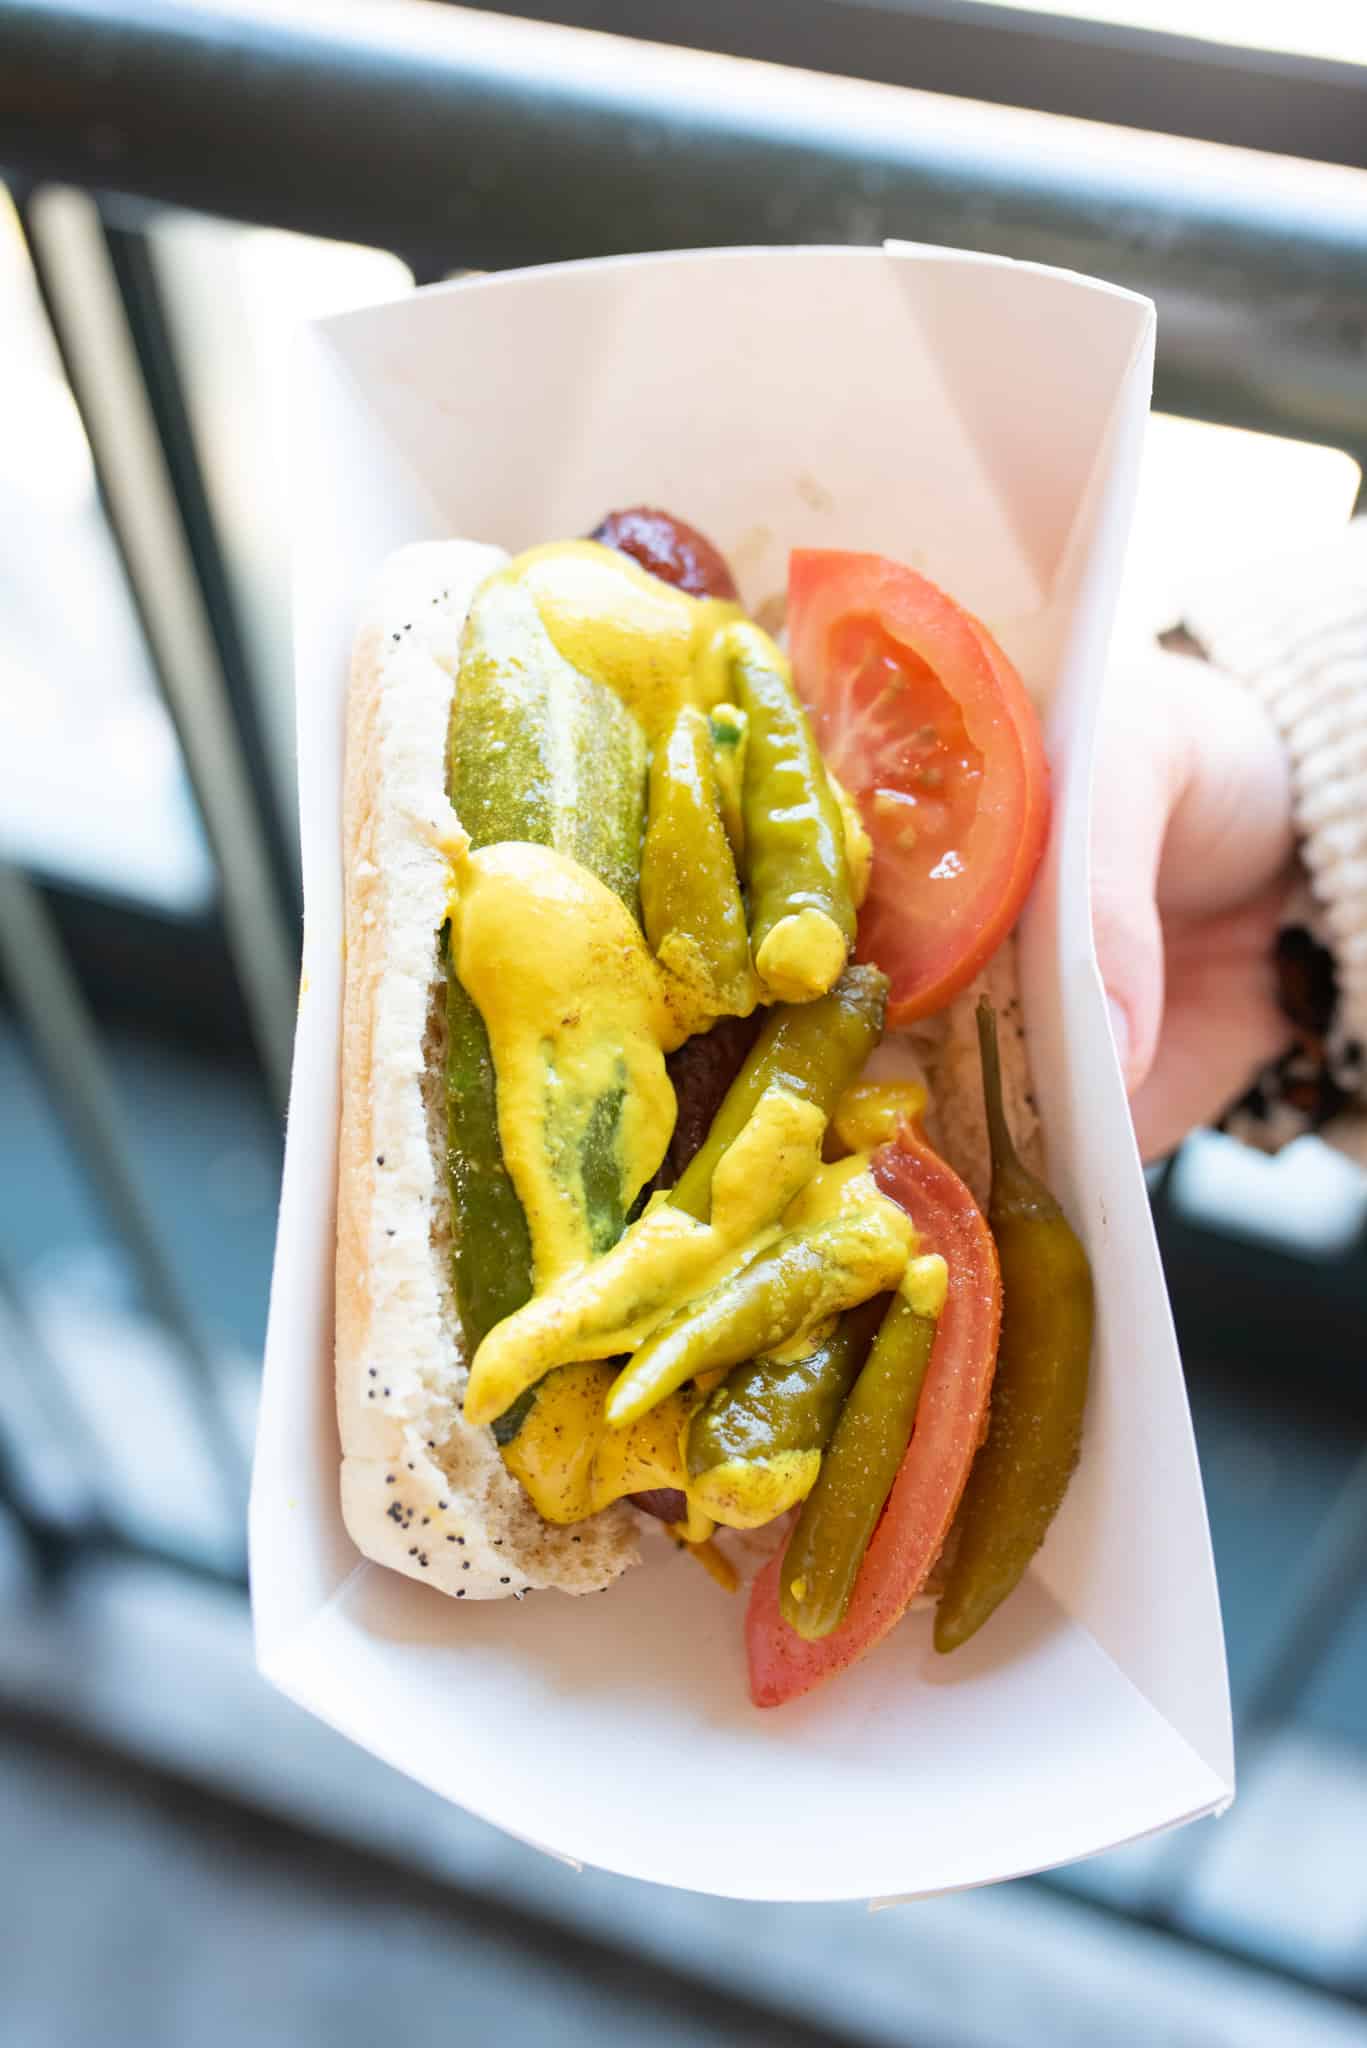 hot dog from Chicago Dog